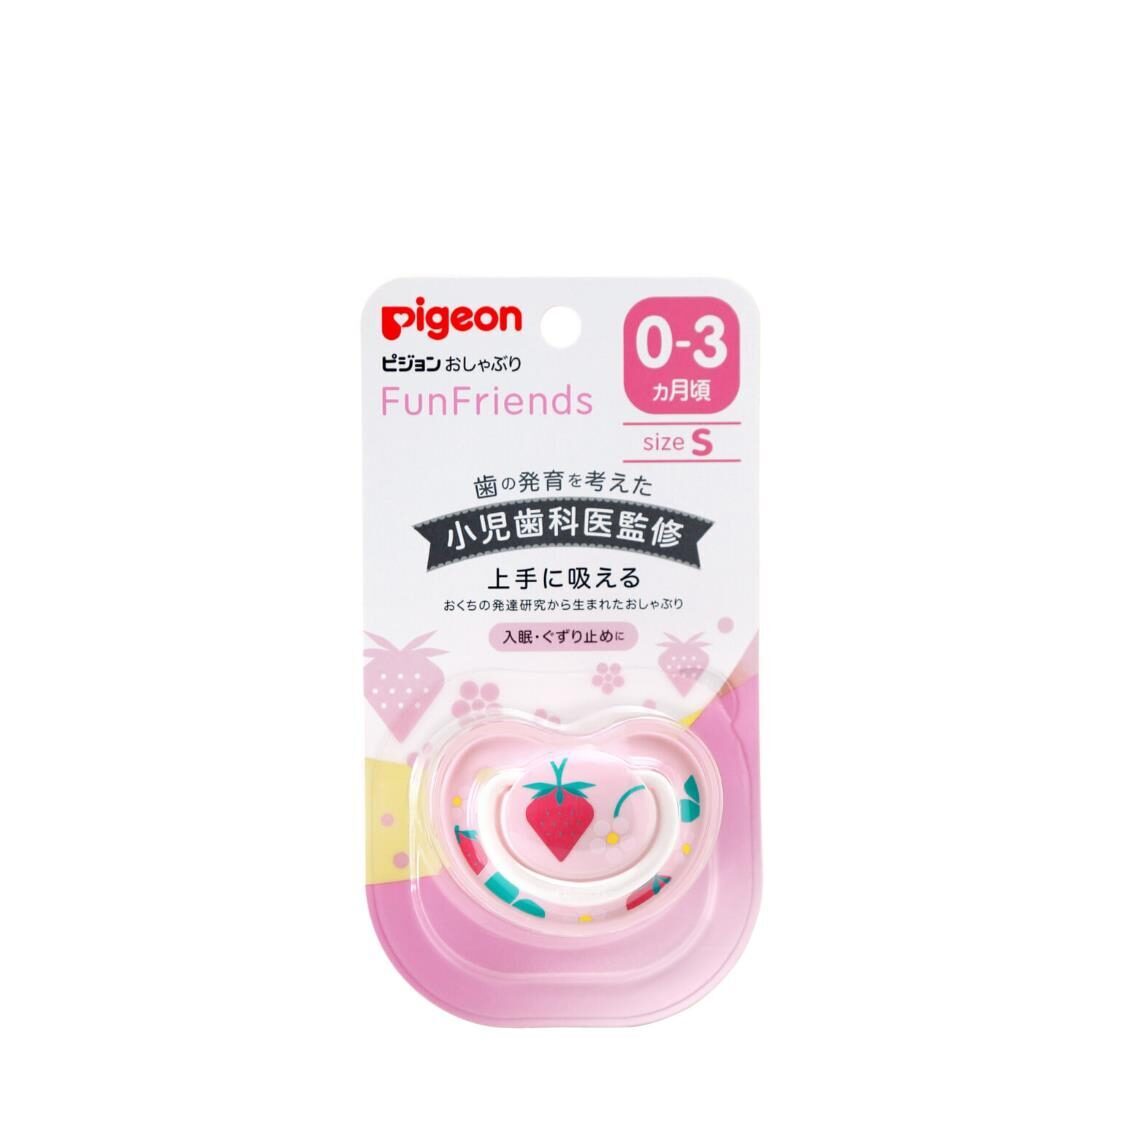 Pigeon Soother Funfriends S Size Strawberry Jp